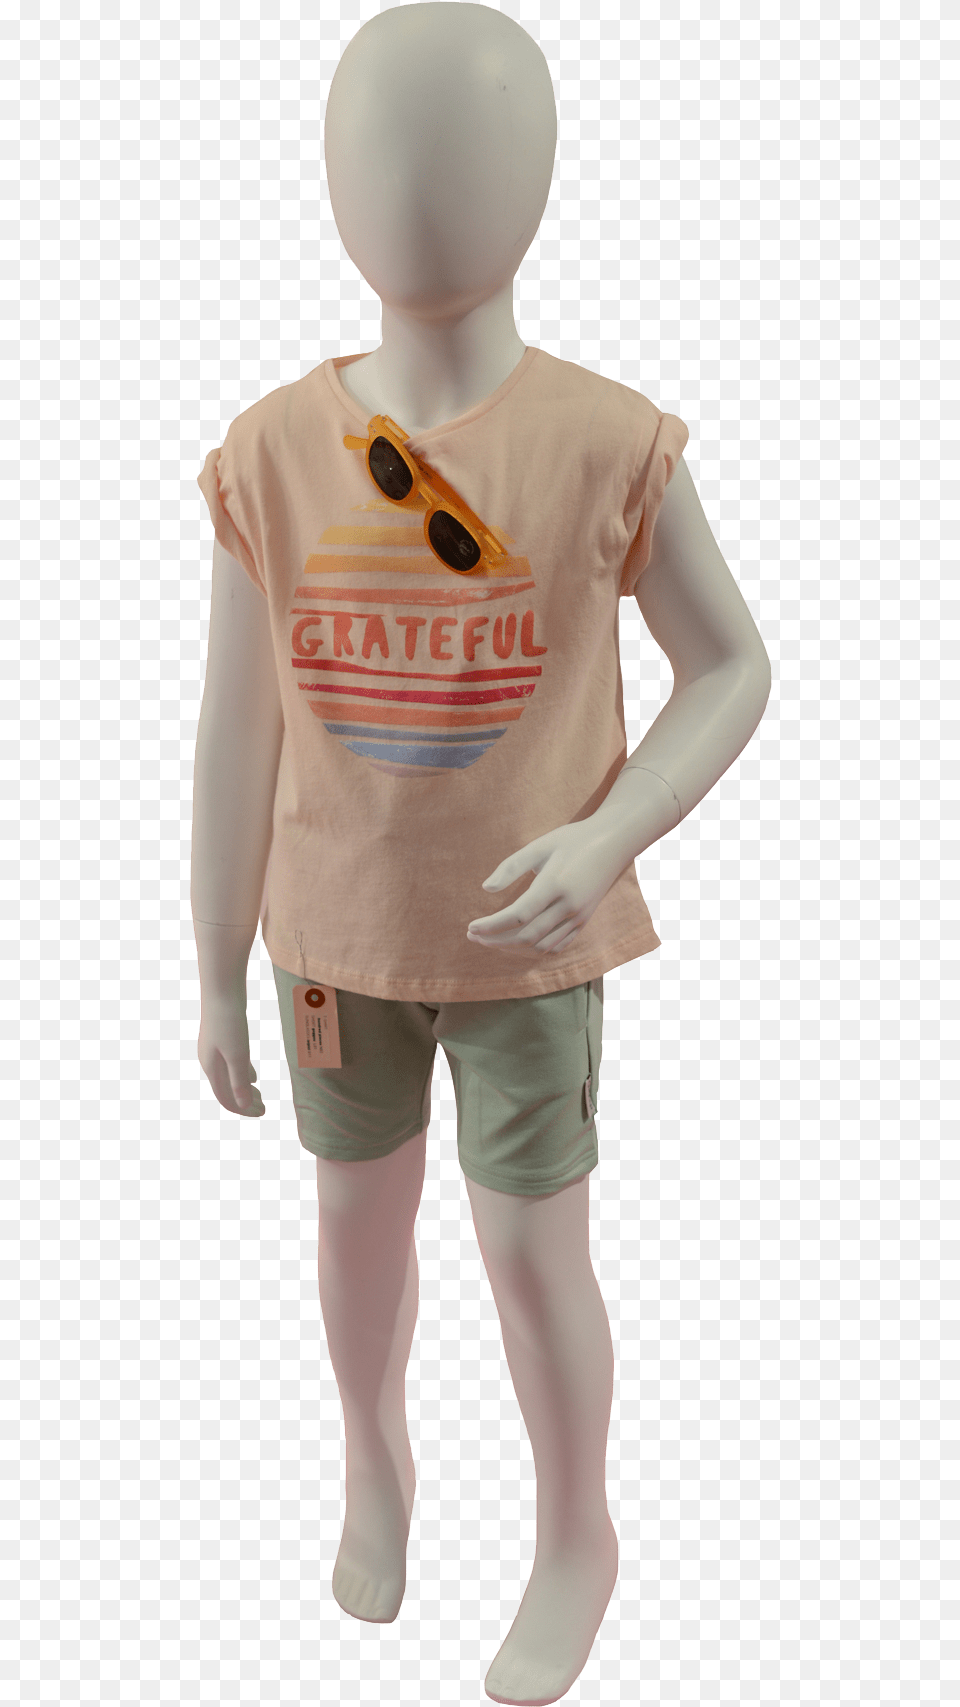 Mannequin, Clothing, T-shirt, Boy, Child Png